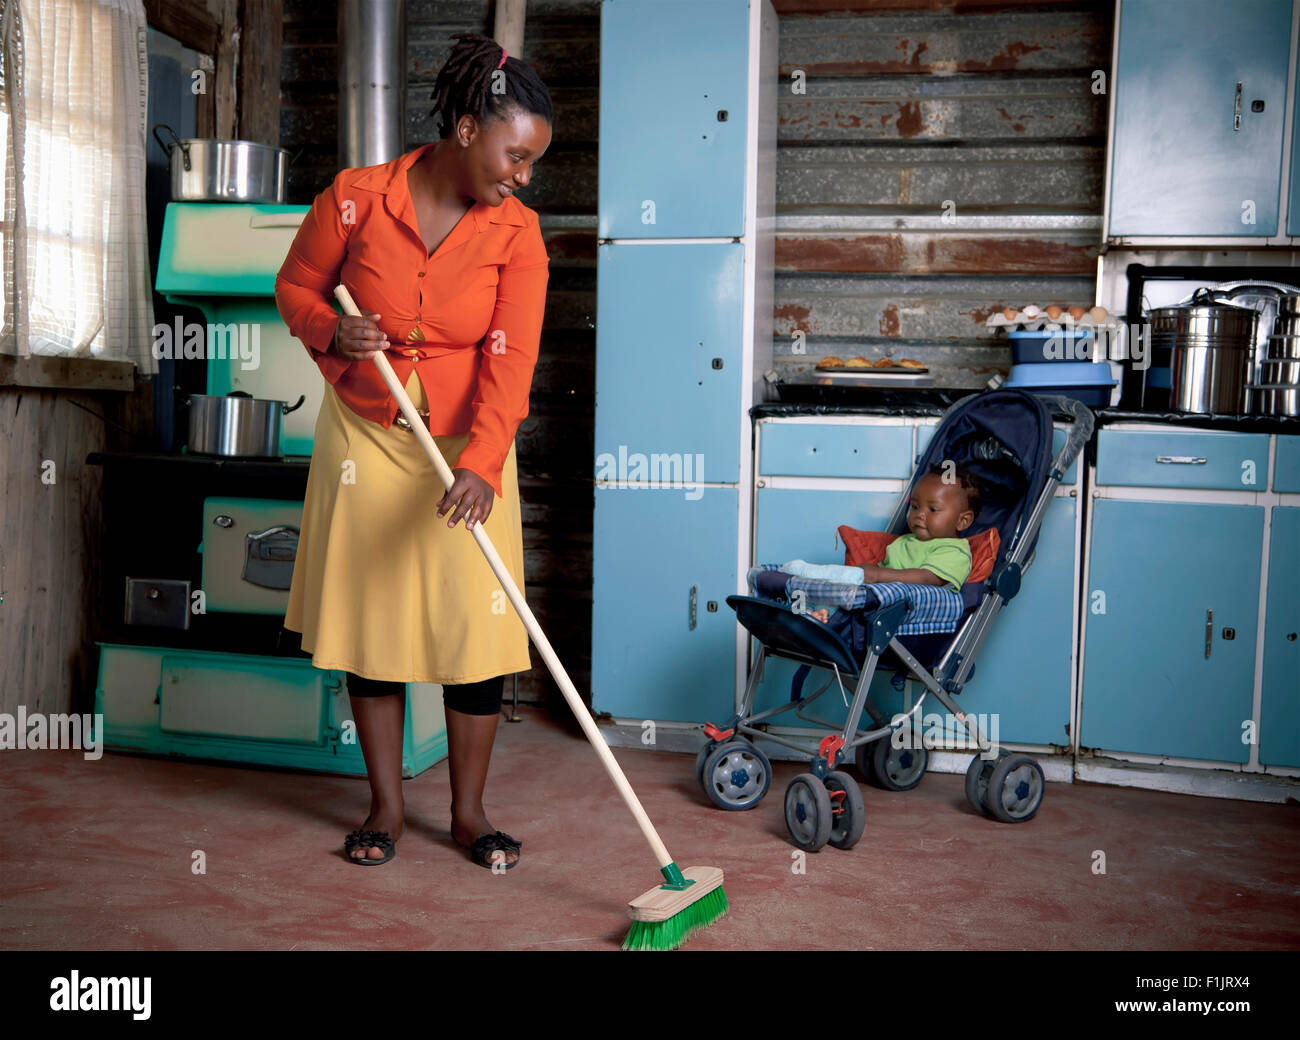 https://c8.alamy.com/comp/F1JRX4/young-black-mother-sweeping-the-floor-inside-her-rural-home-with-her-F1JRX4.jpg